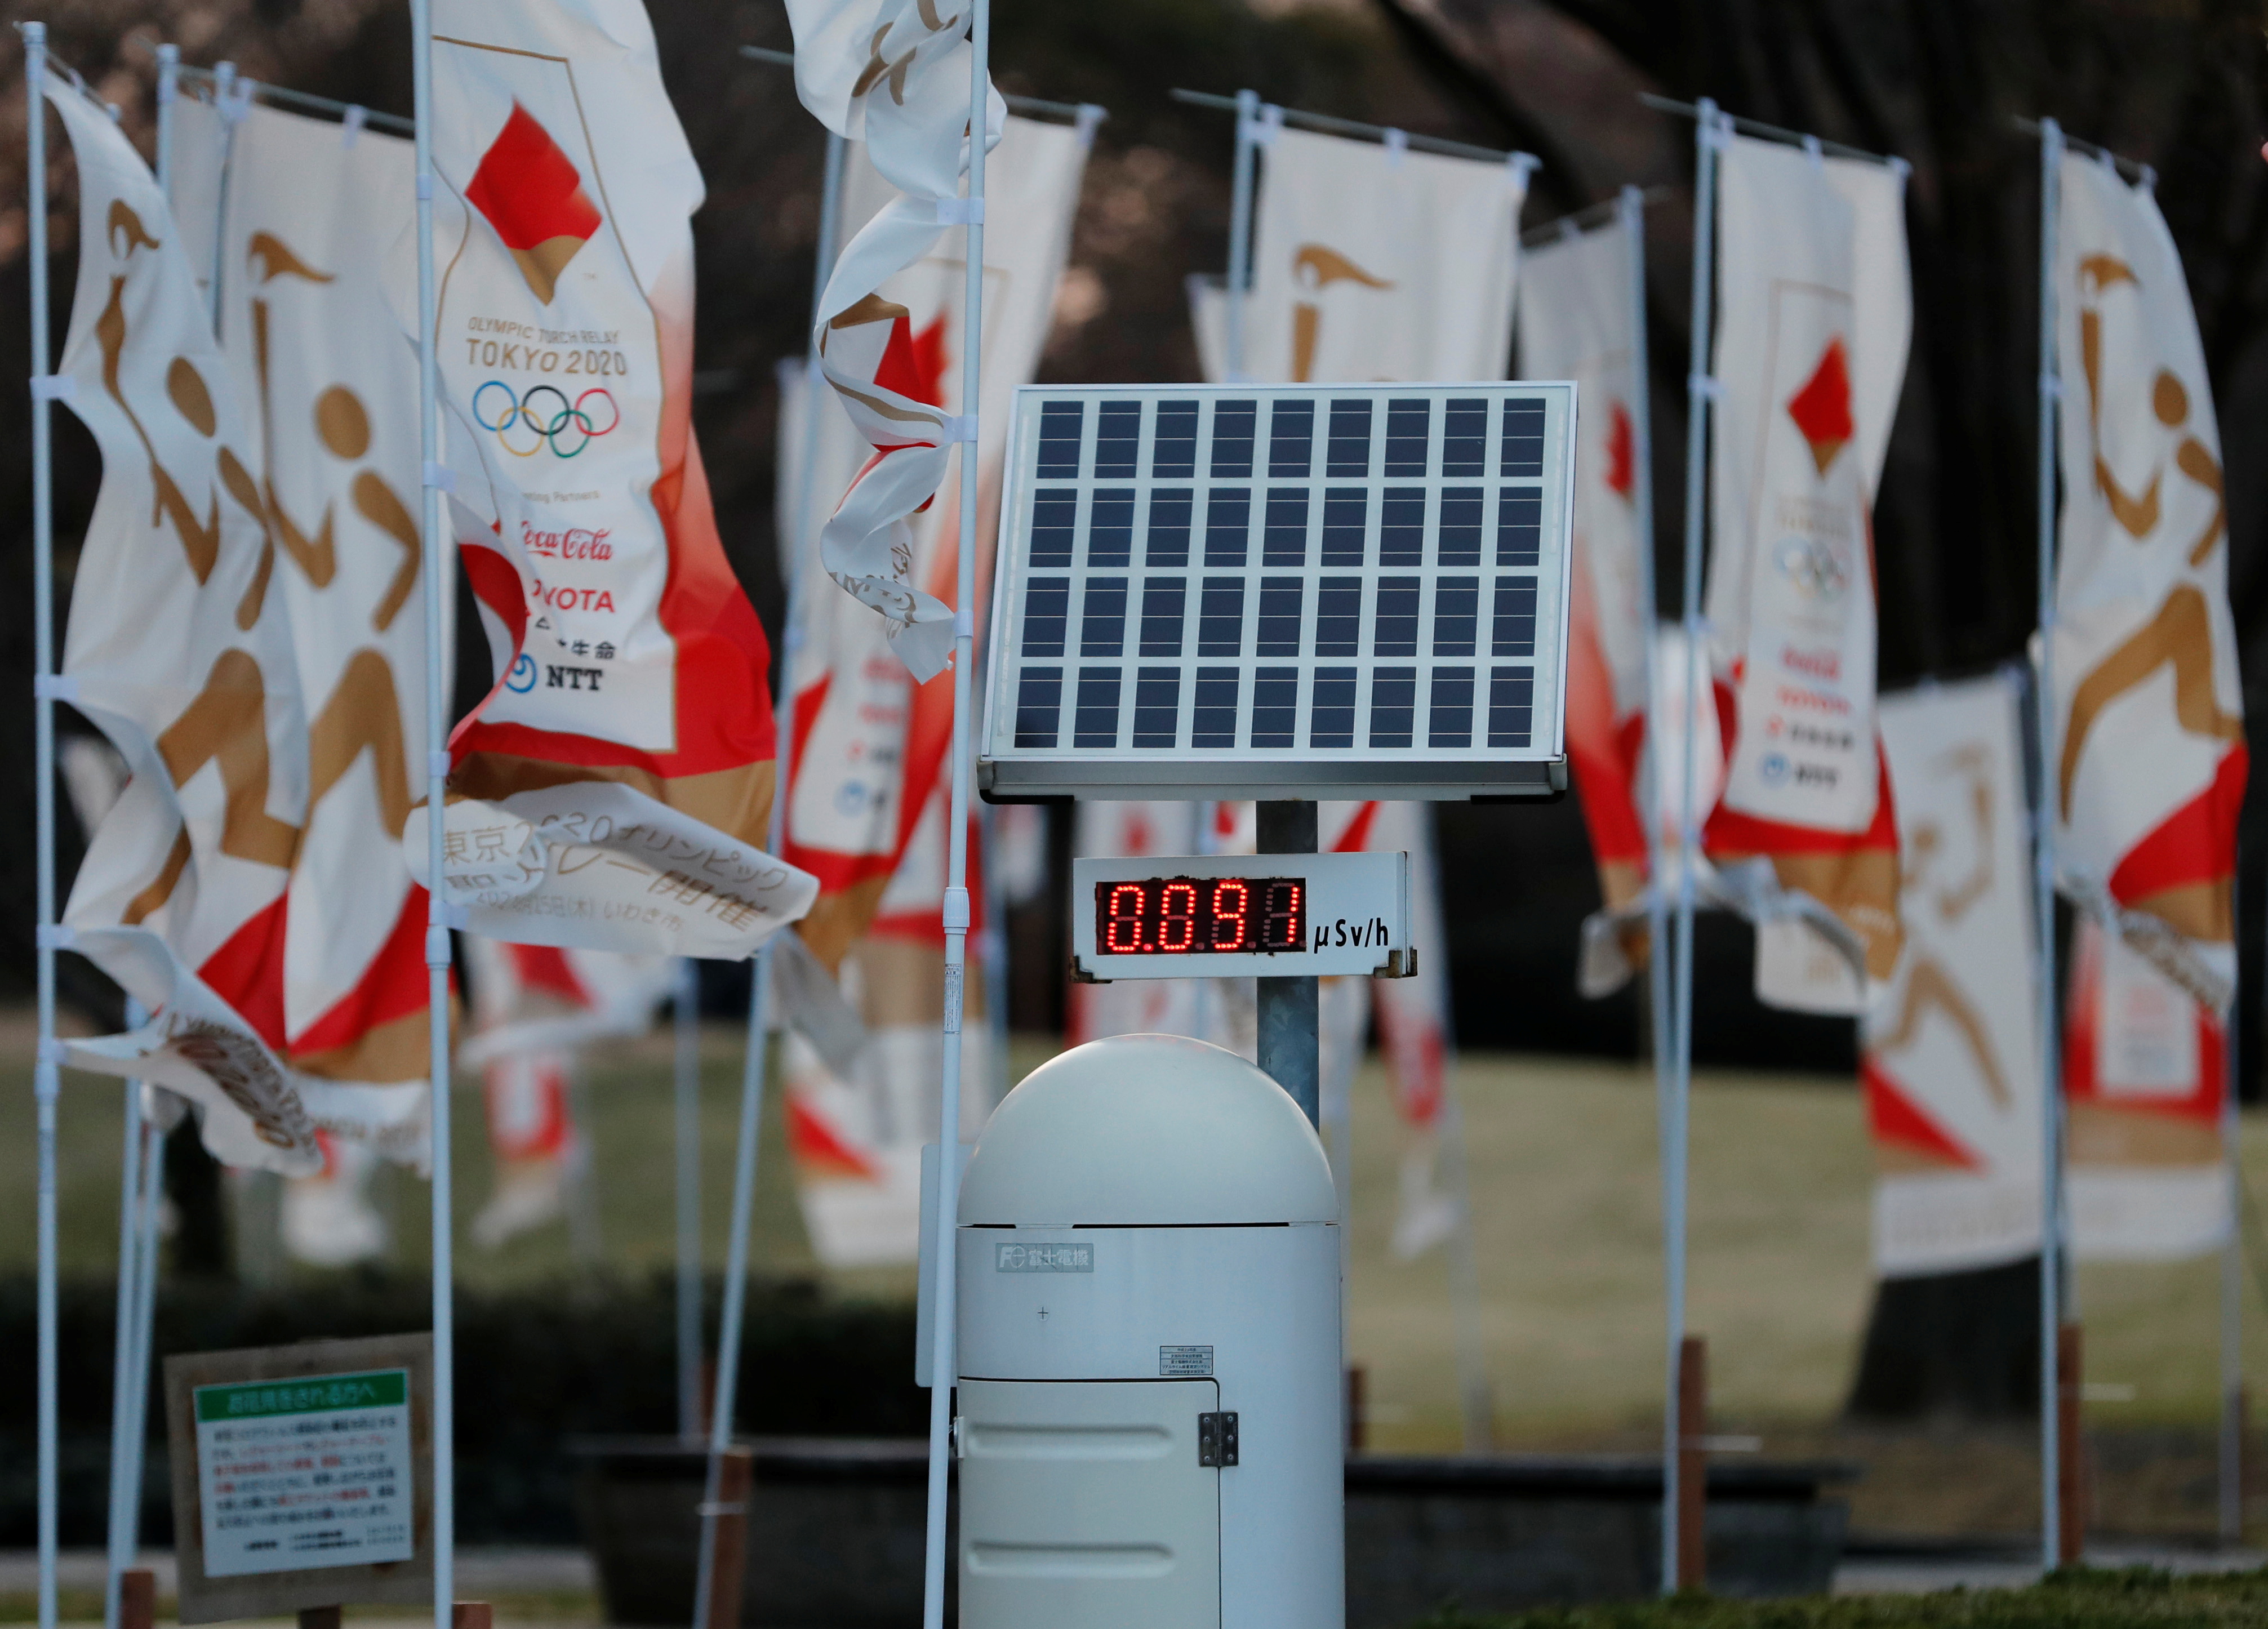 A Geiger counter is seen next to Tokyo 2020 Olympic Games flags at a park in Iwaki